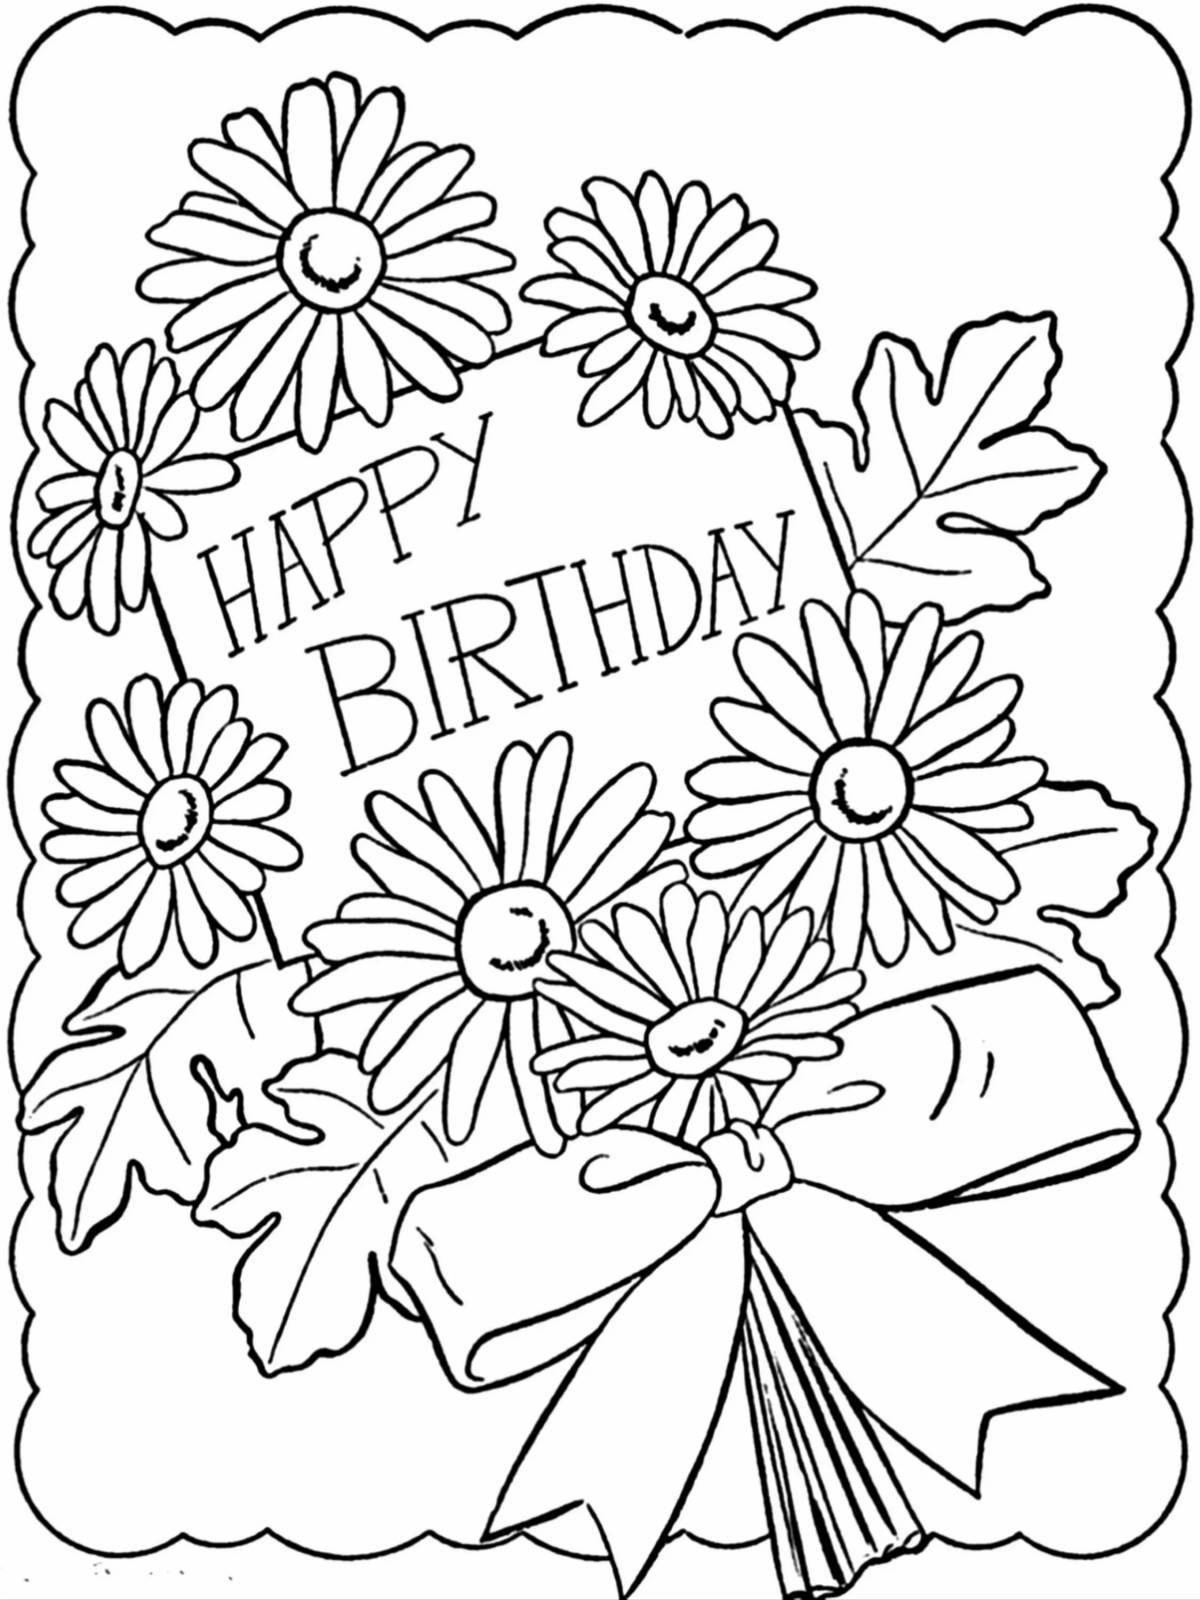 Coloring page birthday cheerful grandmother